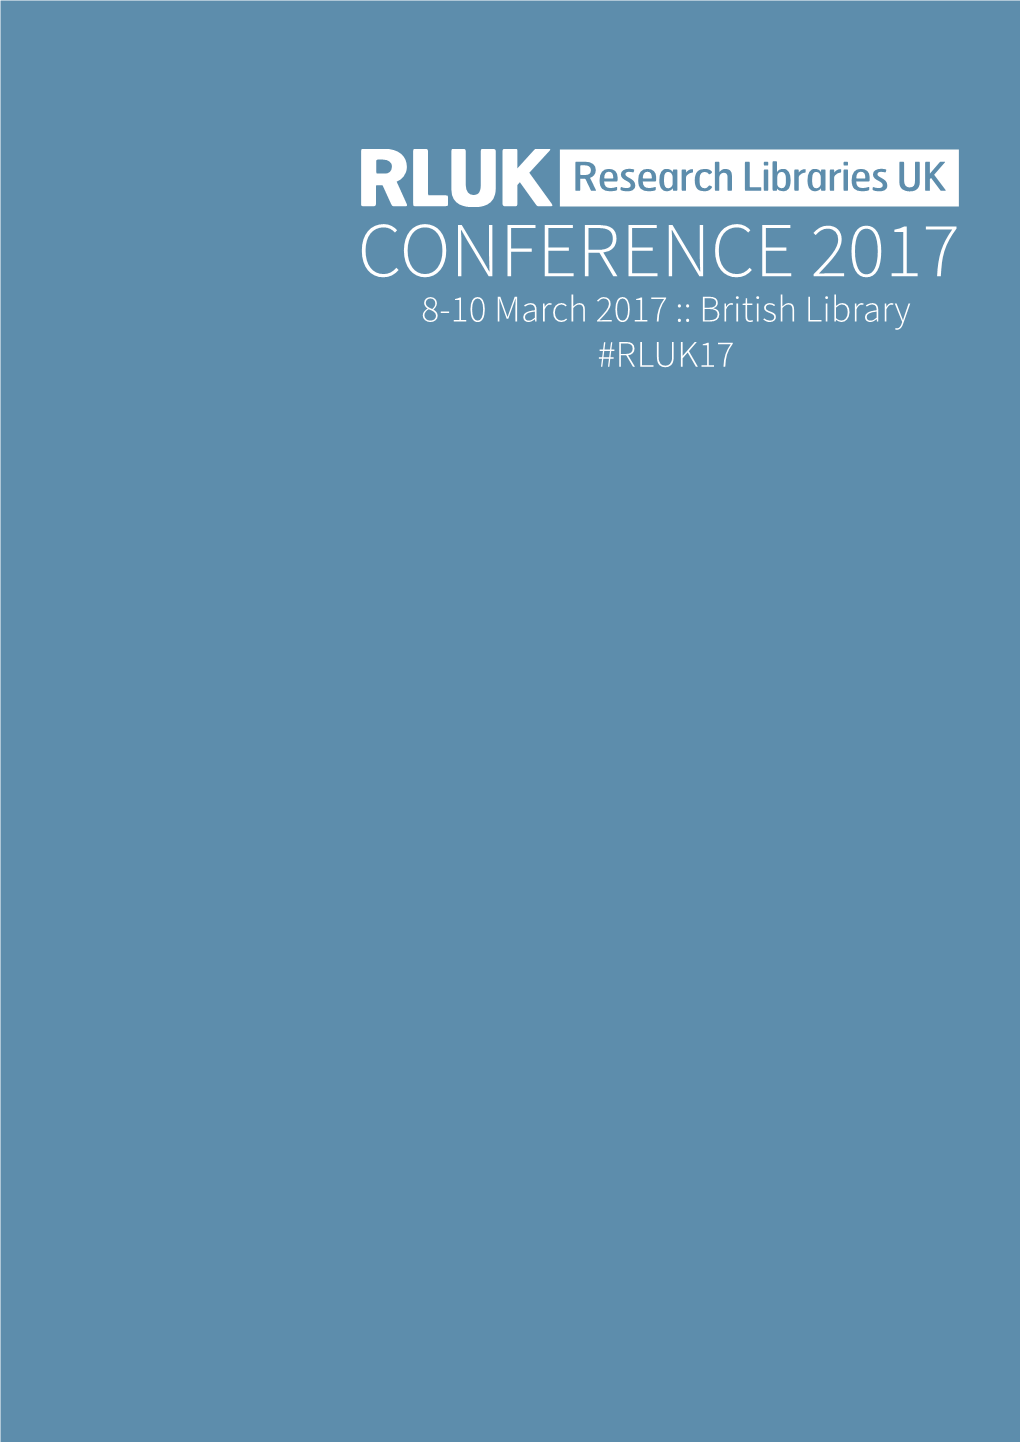 CONFERENCE 2017 8-10 March 2017 :: British Library #RLUK17 RLUK17 SPONSORS WELCOME to the RLUK CONFERENCE 2017